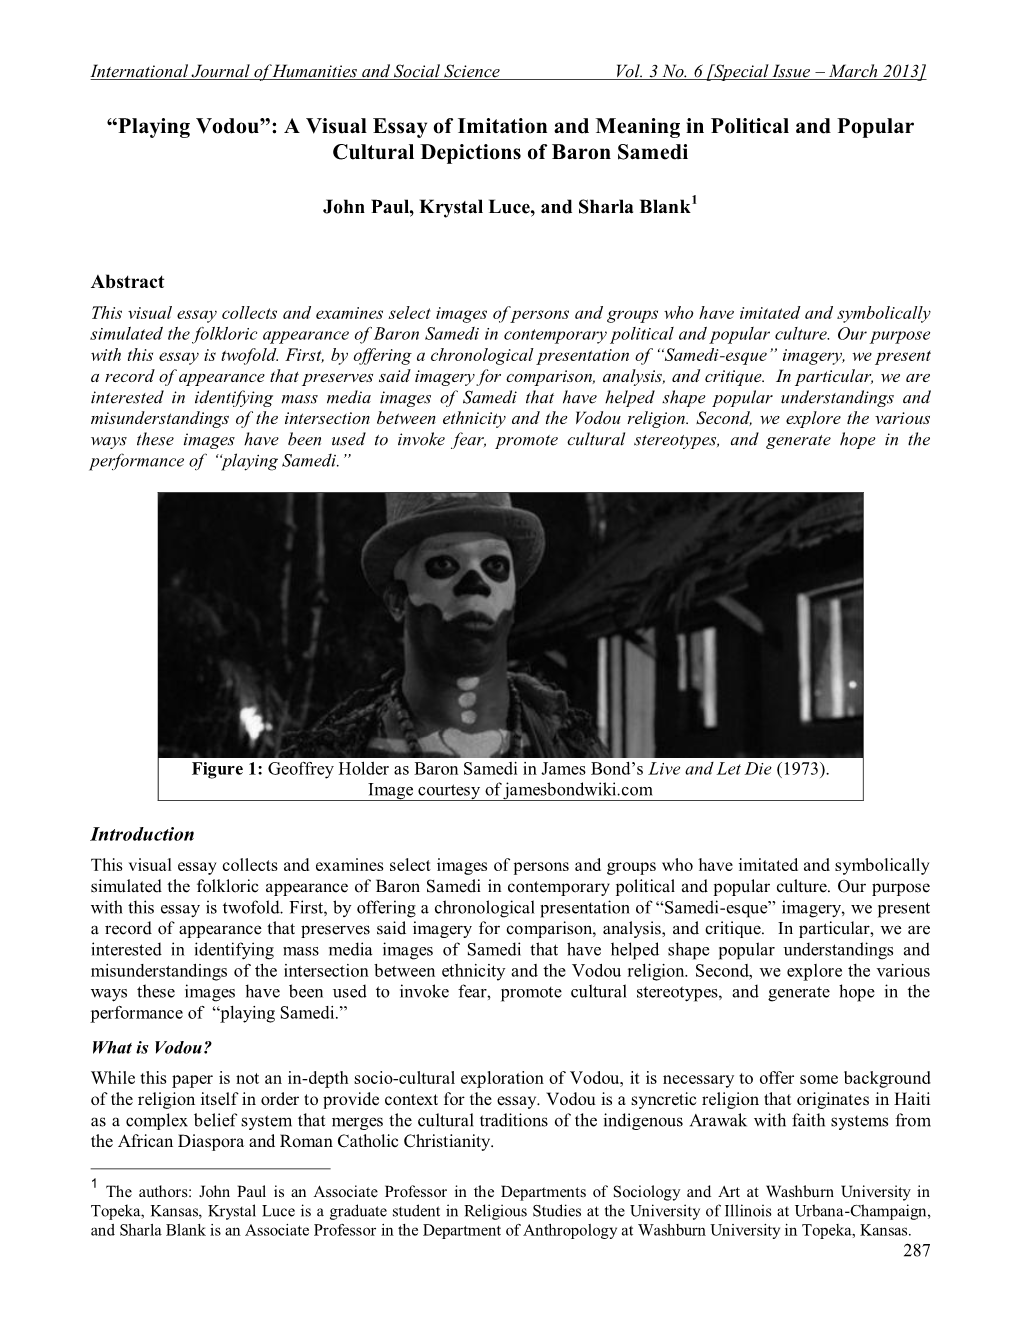 “Playing Vodou”: a Visual Essay of Imitation and Meaning in Political and Popular Cultural Depictions of Baron Samedi